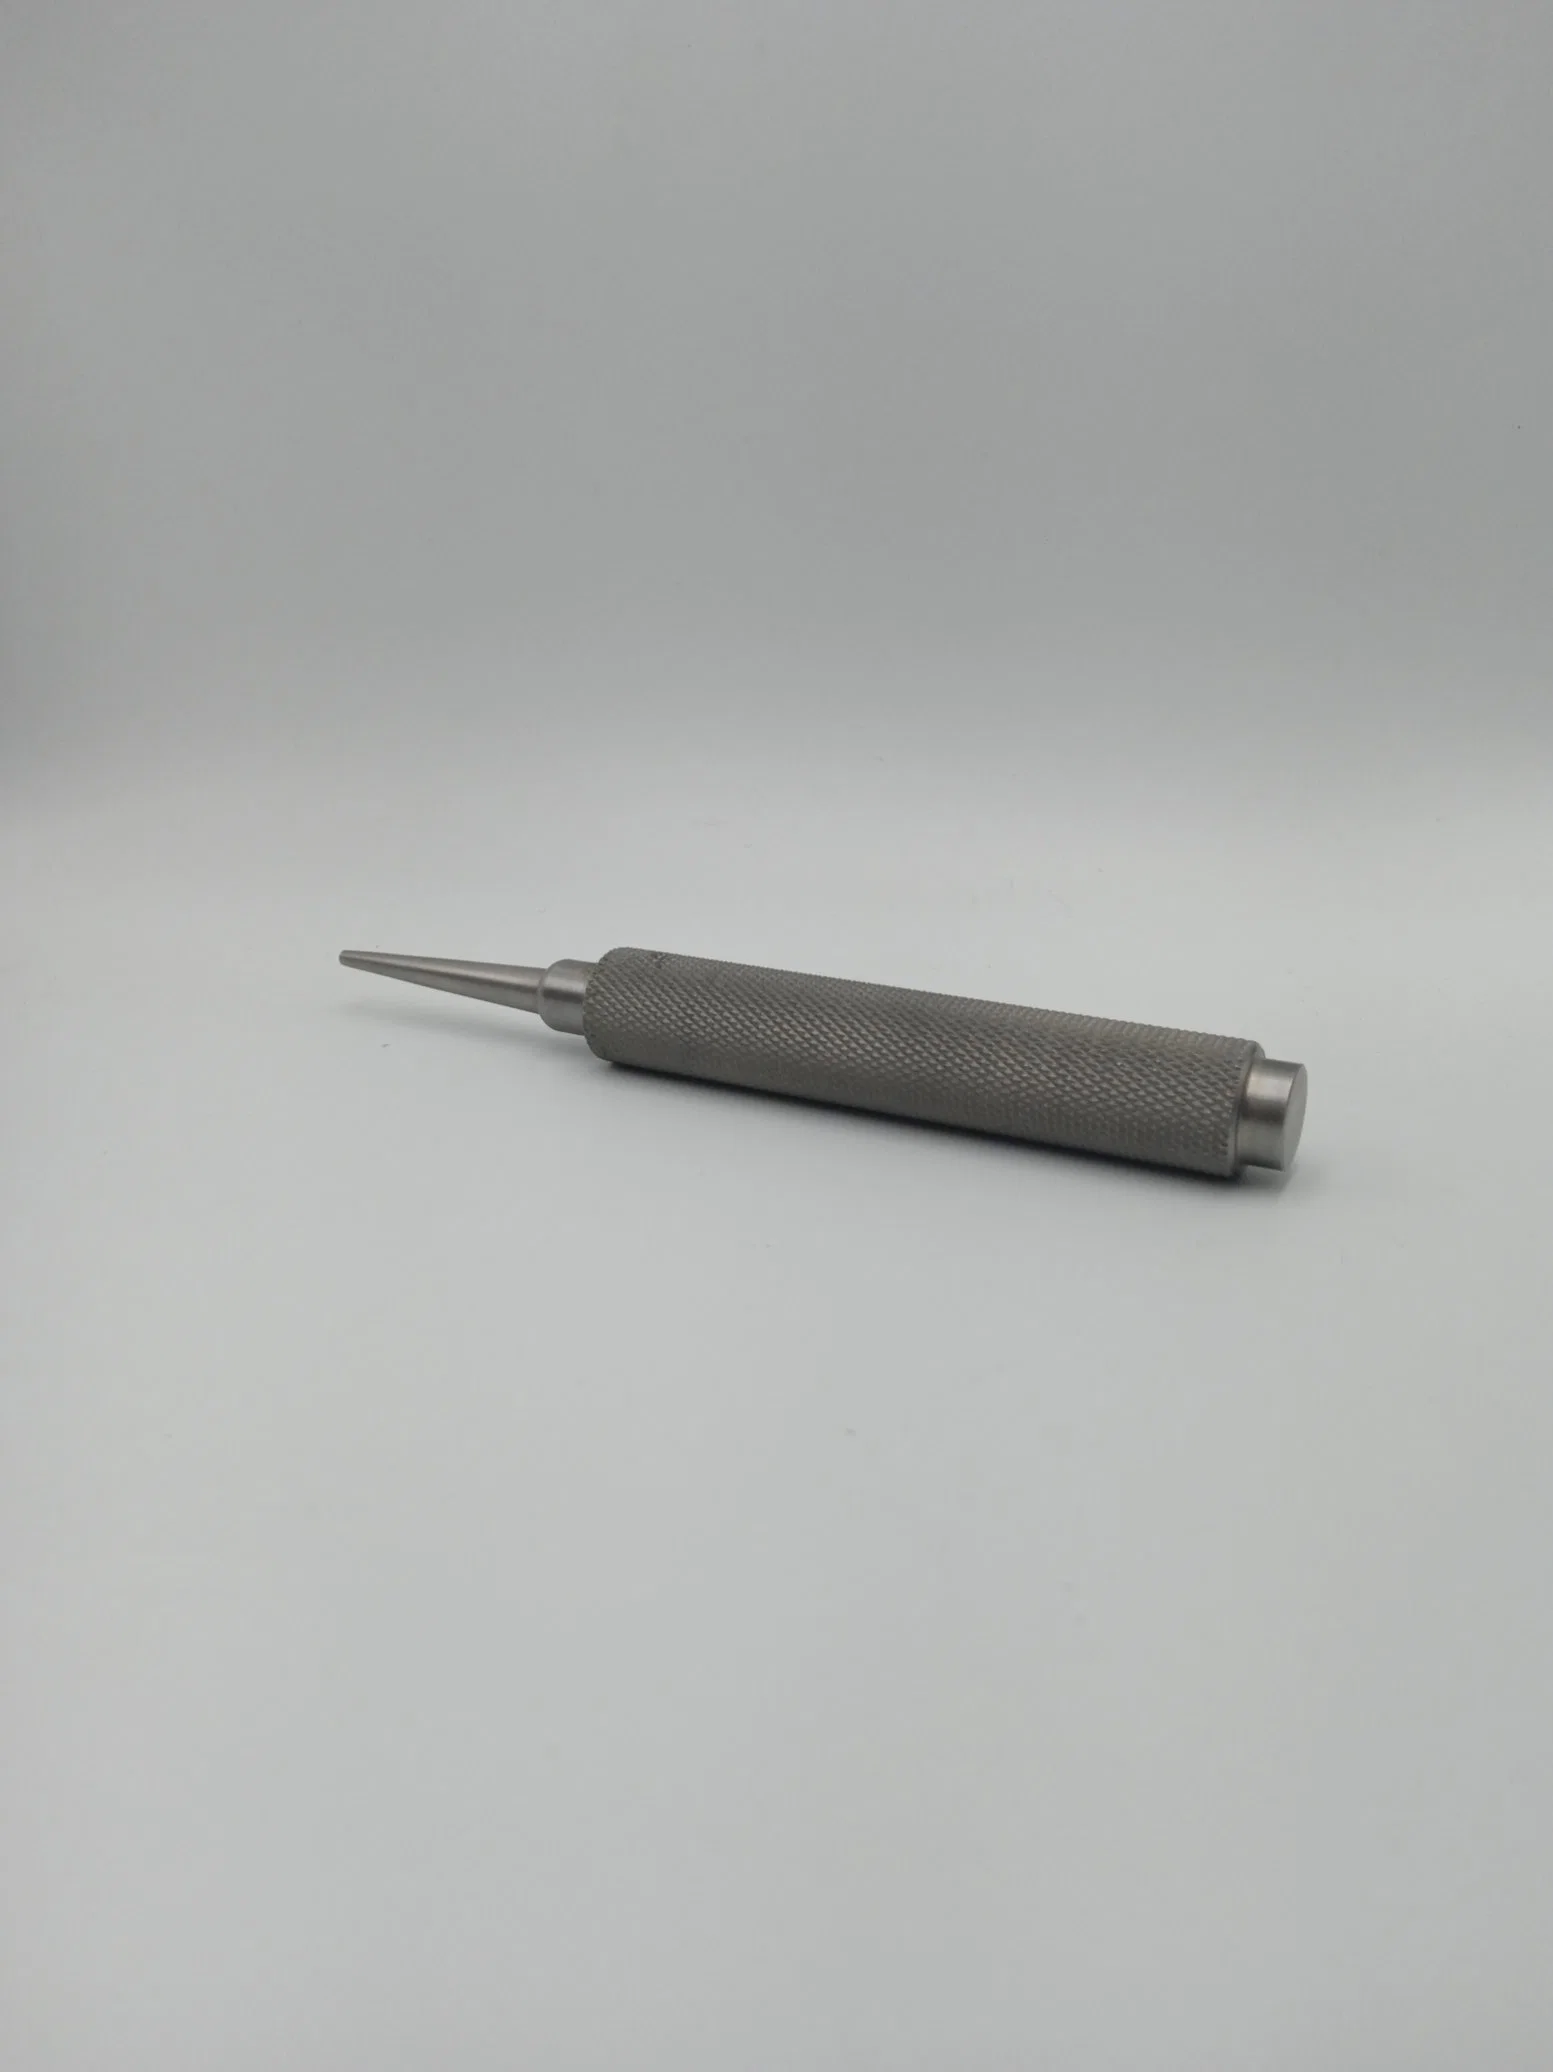 General Fracture Fixation Trauma Instrument Orthopedic Instrument Kirschner Wire Punch